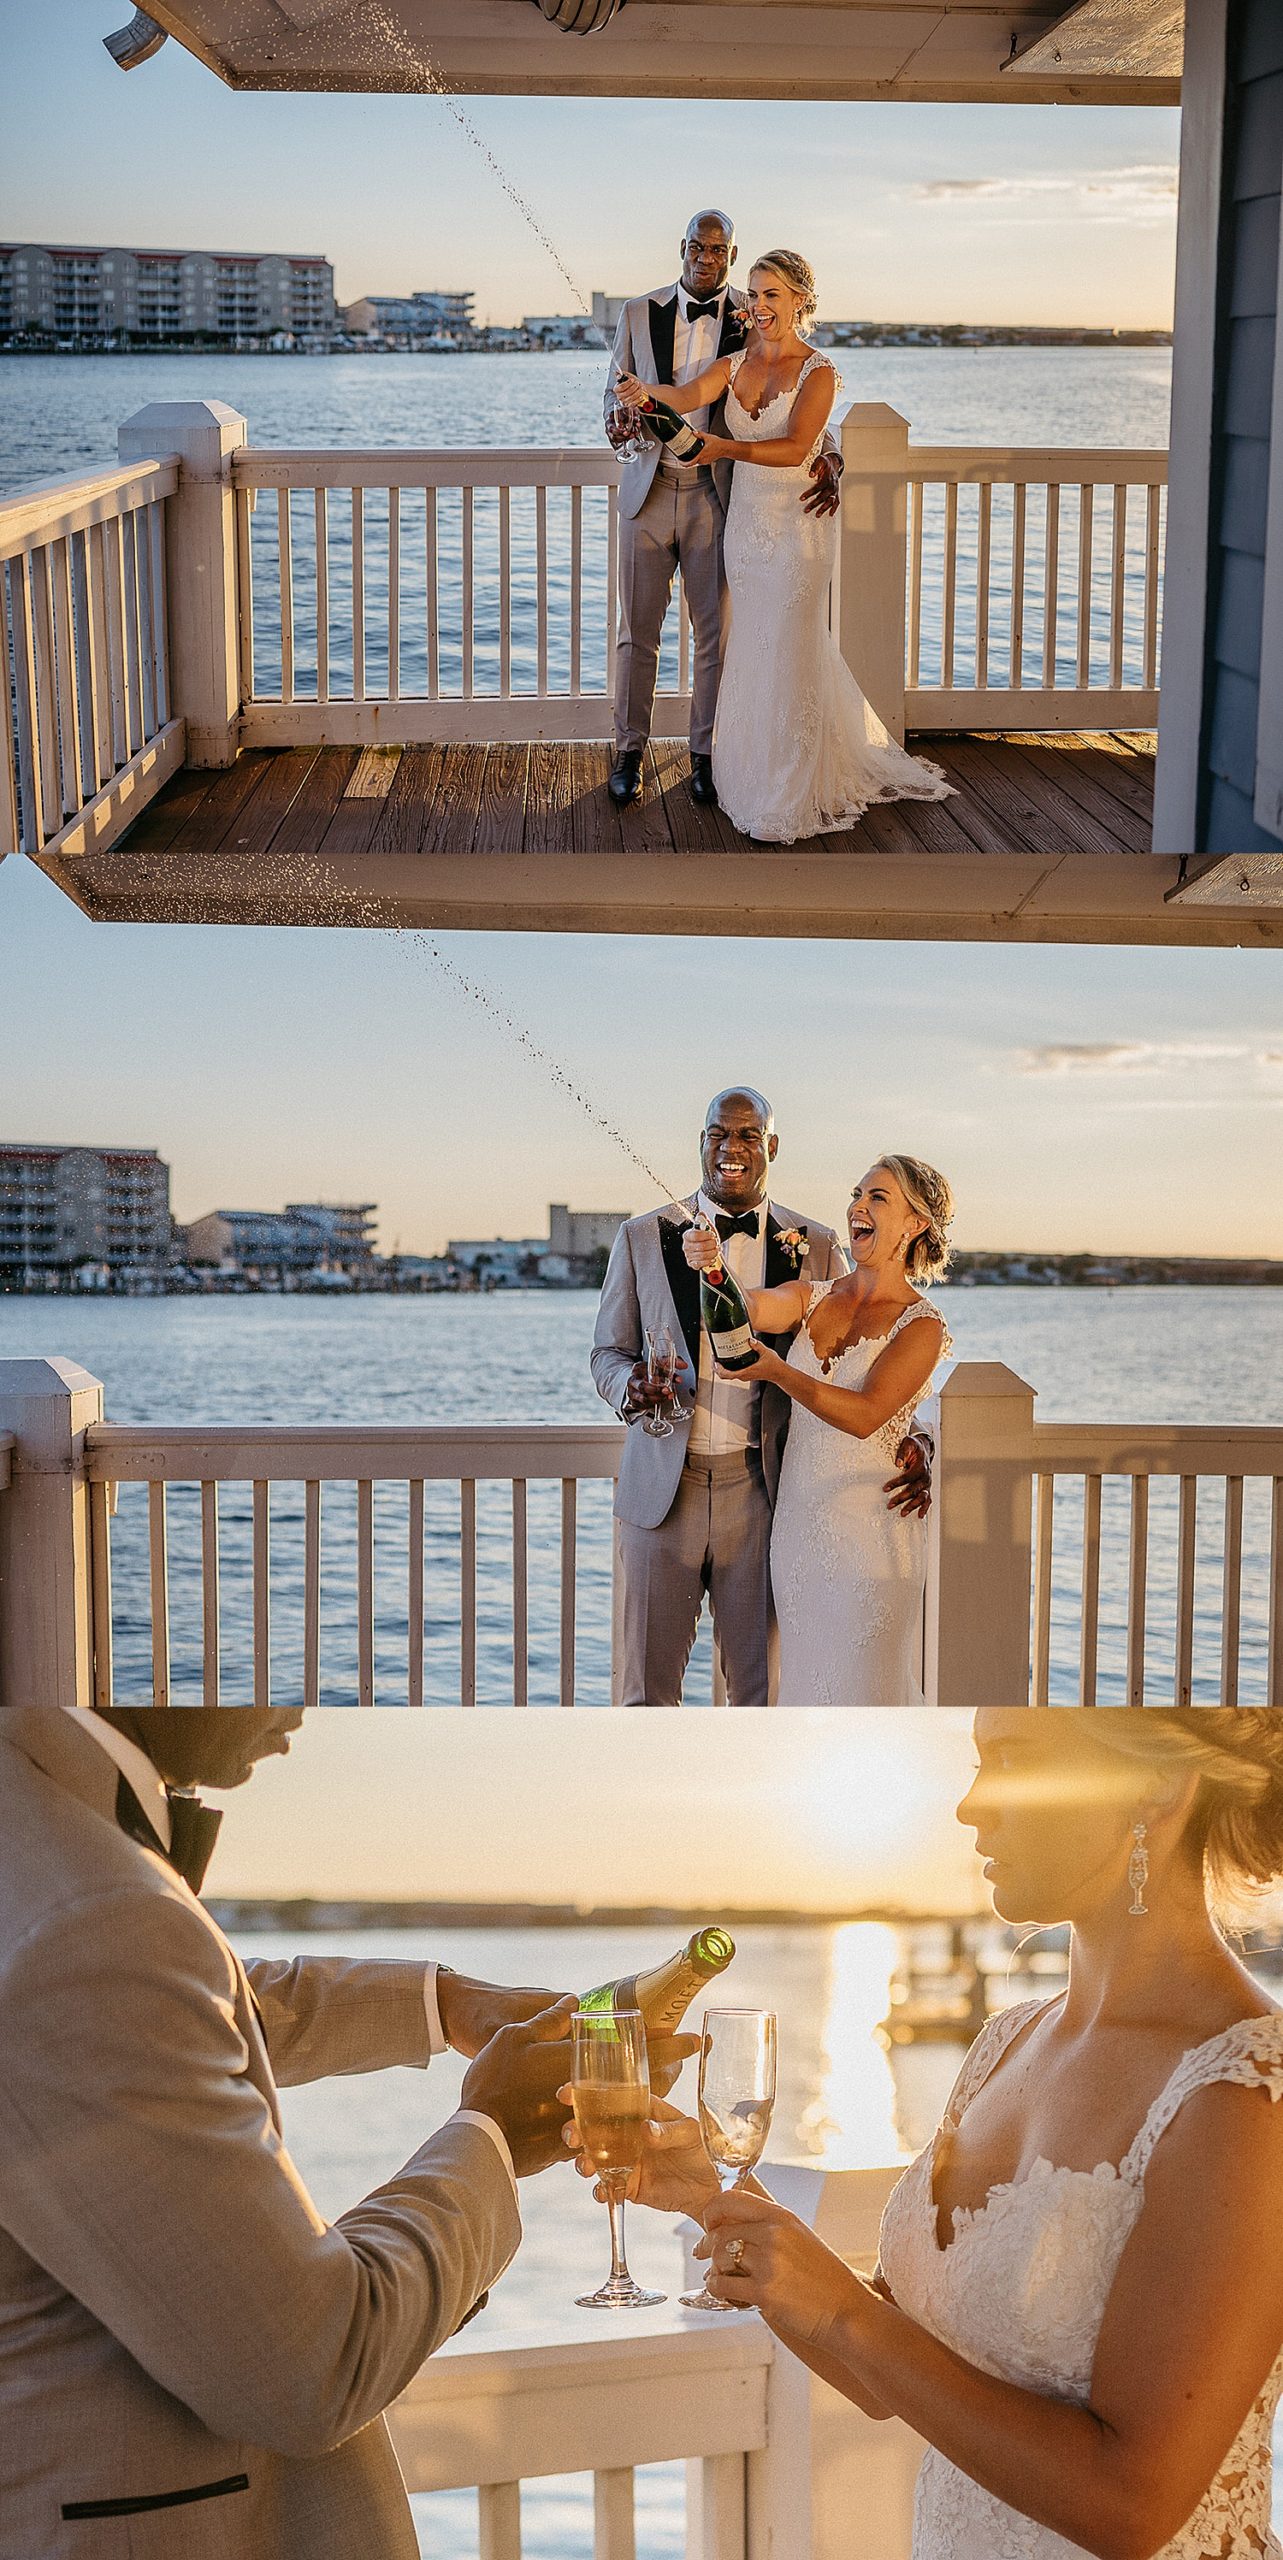 Newly married couple pop bottle of champagne at Florida wedding with Destin wedding photographer